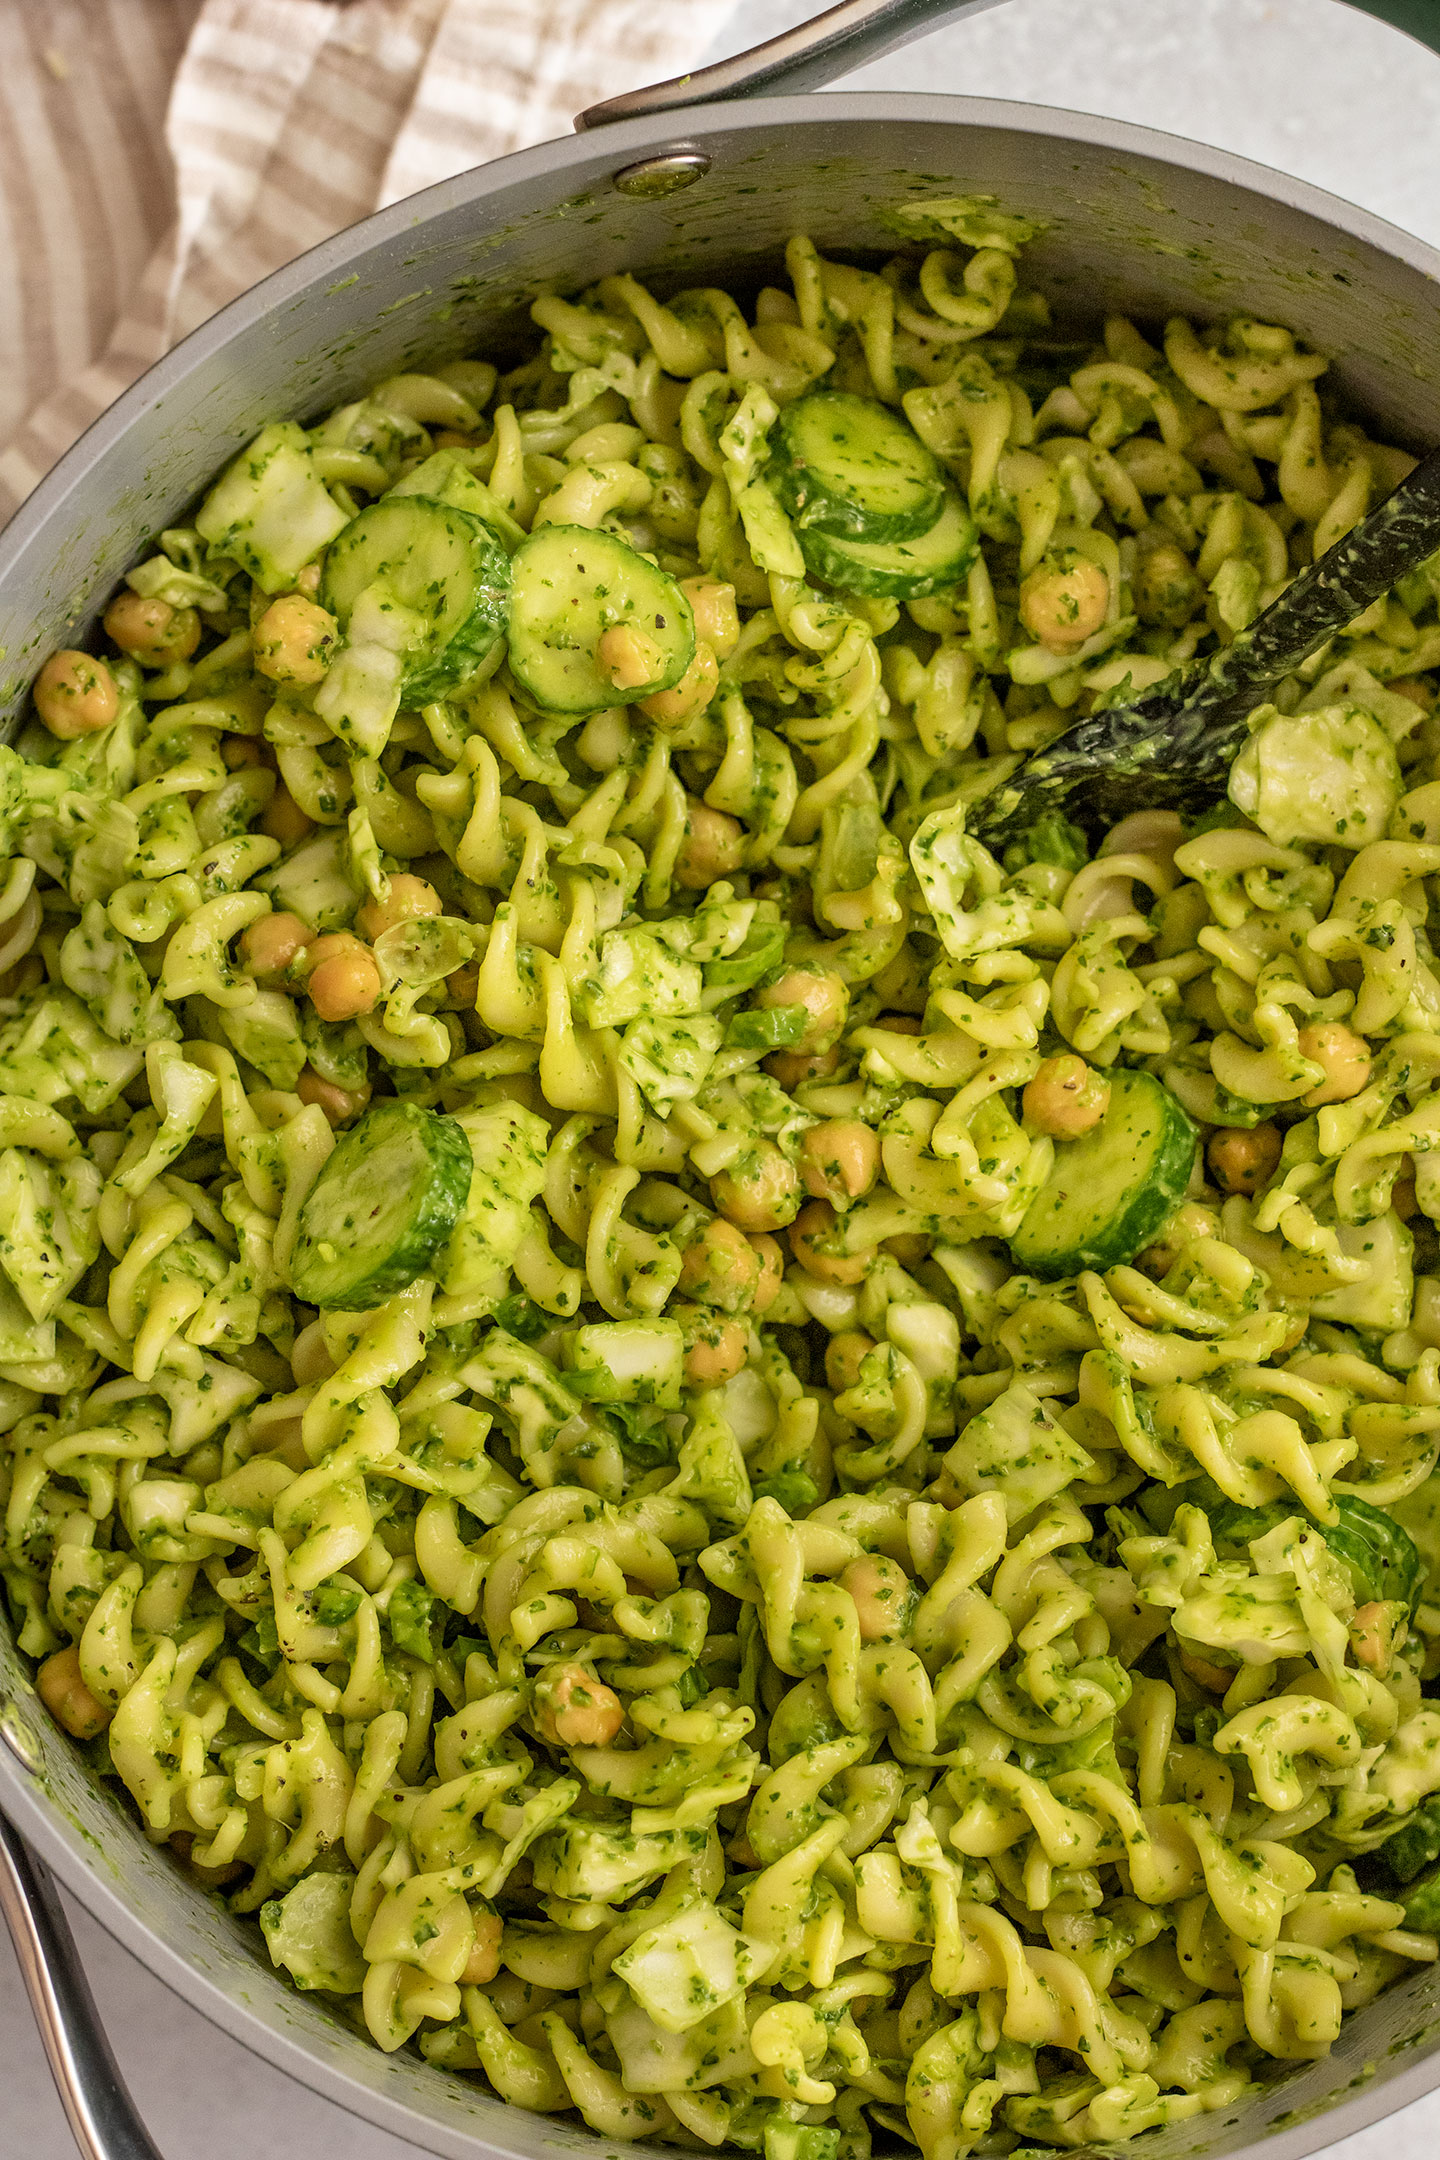 Green goddess dressing fully mixed together with pasta, veggies and chickpeas.